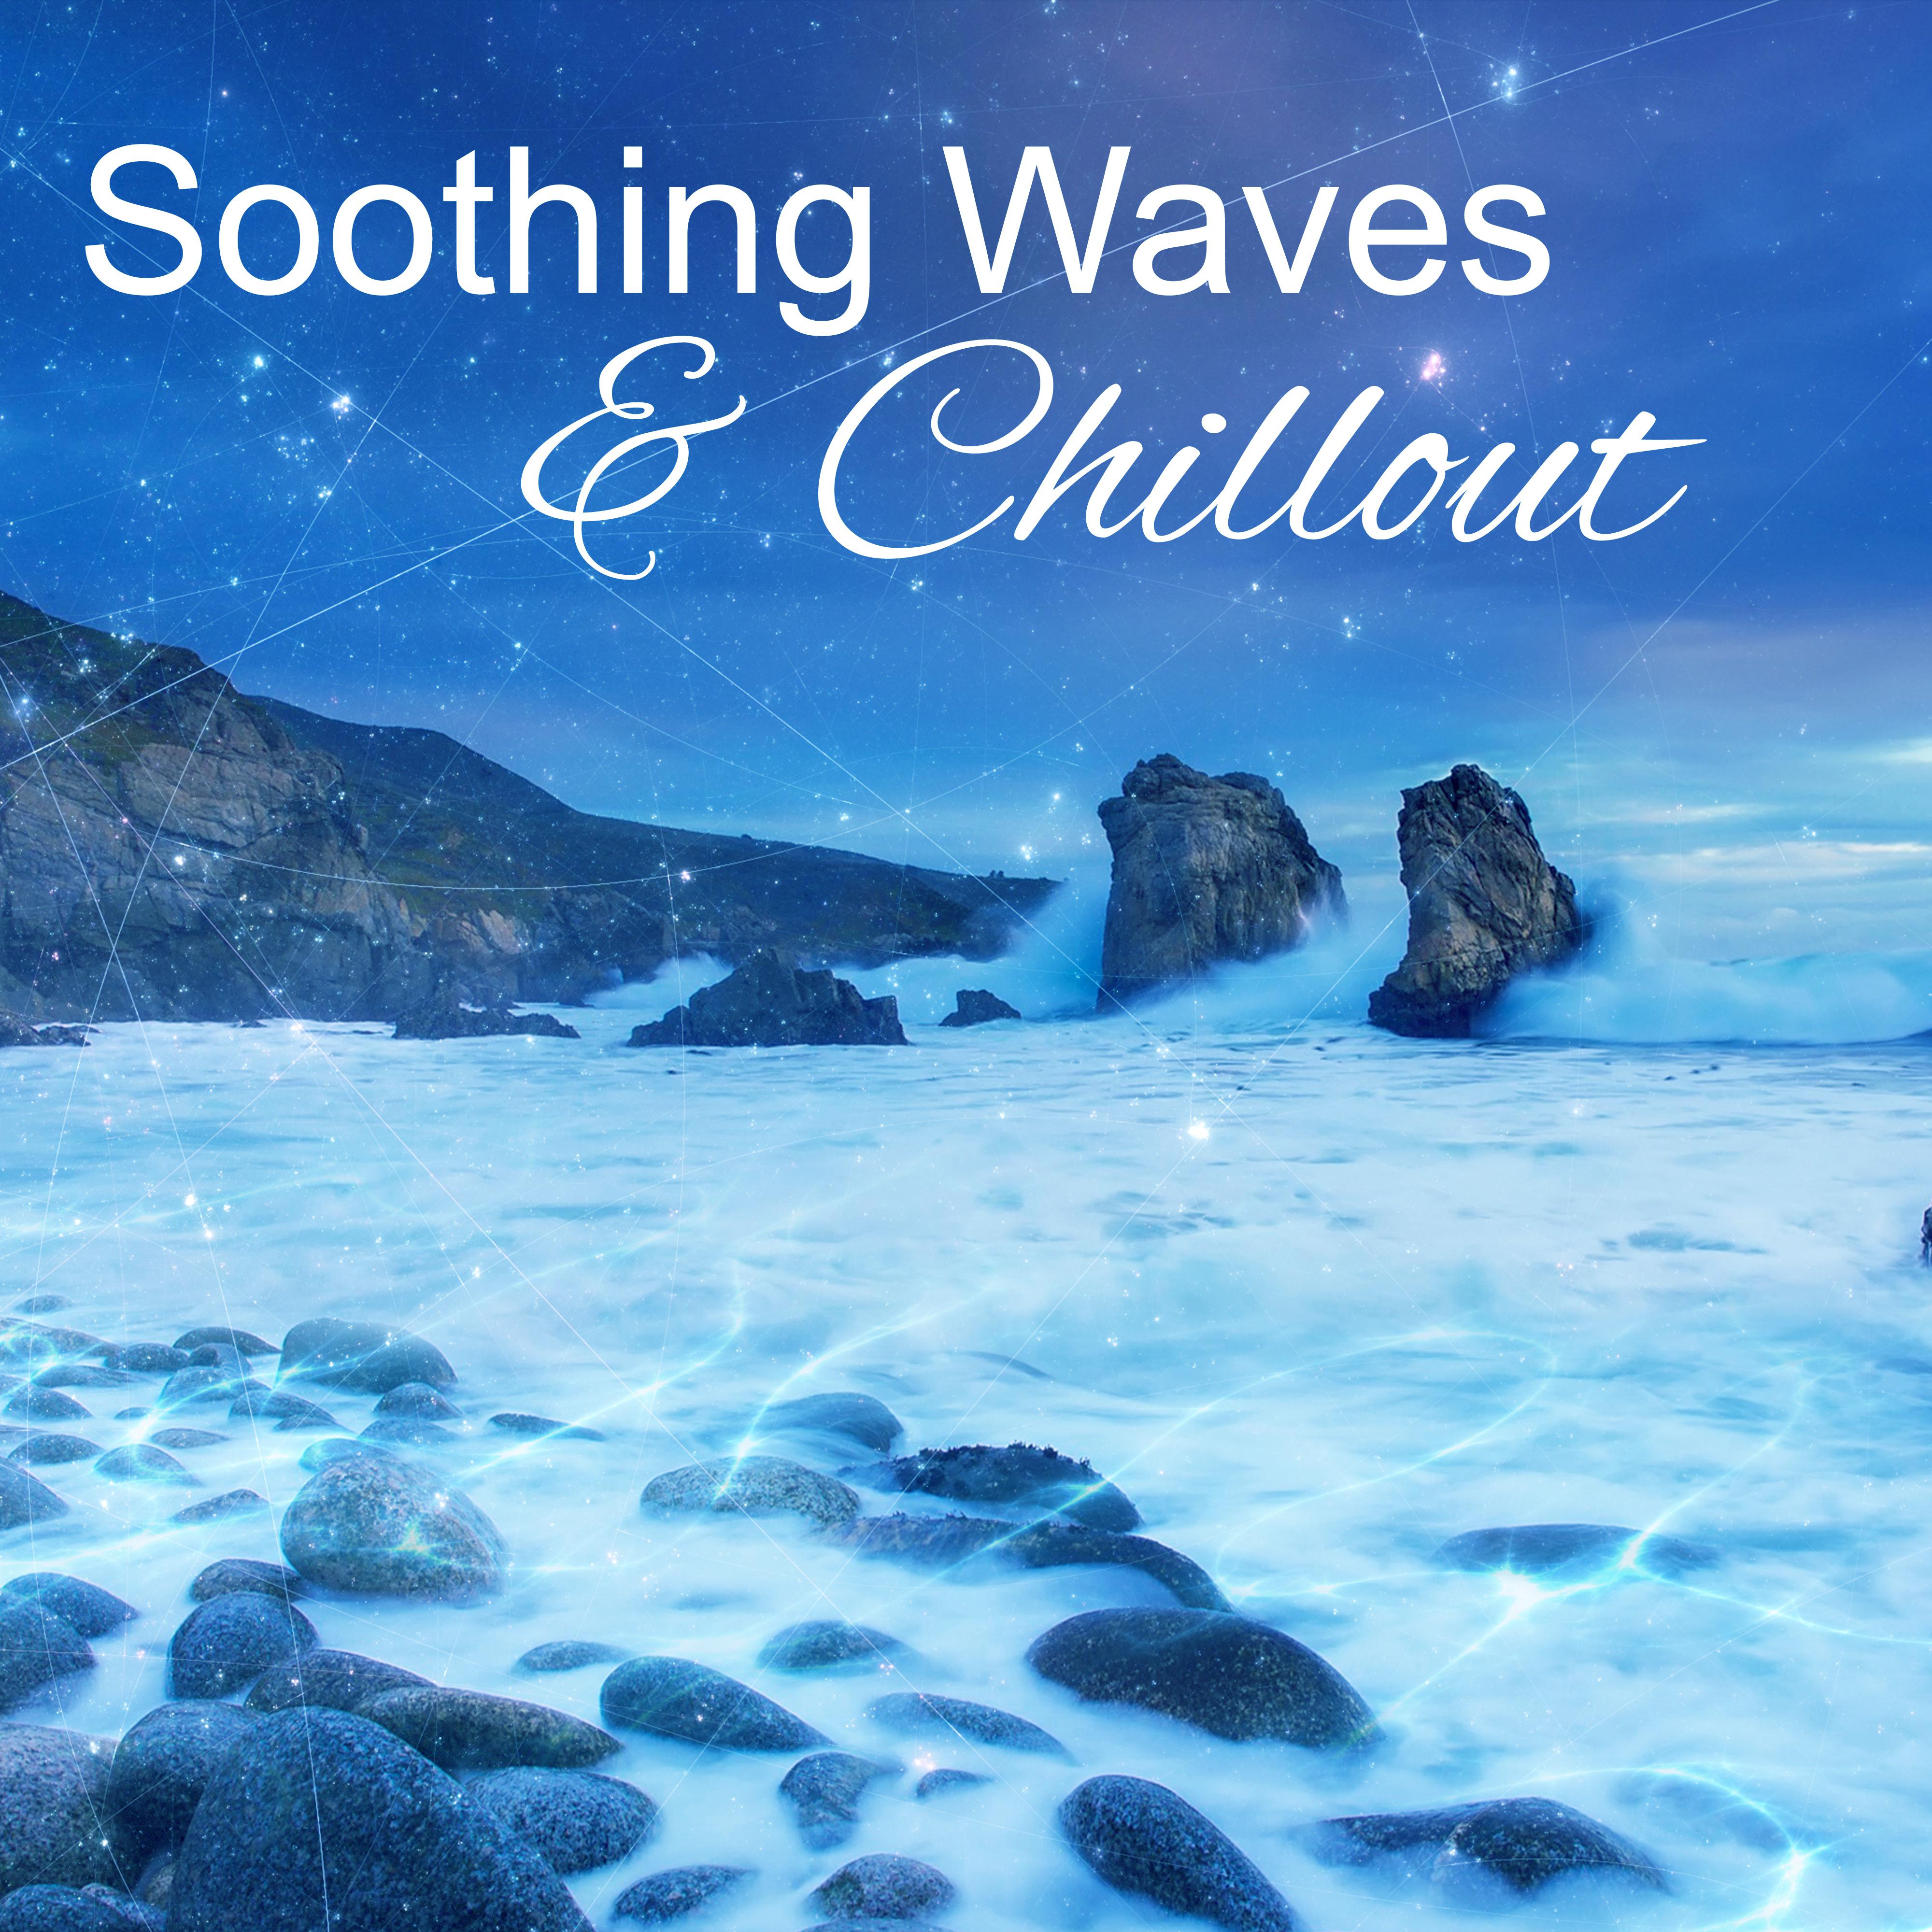 Soothing Waves  Chillout  Music for Relaxation, Deep Sleep, Sea Sounds, Gentle Waves, Nature Sounds to Rest, Calmness